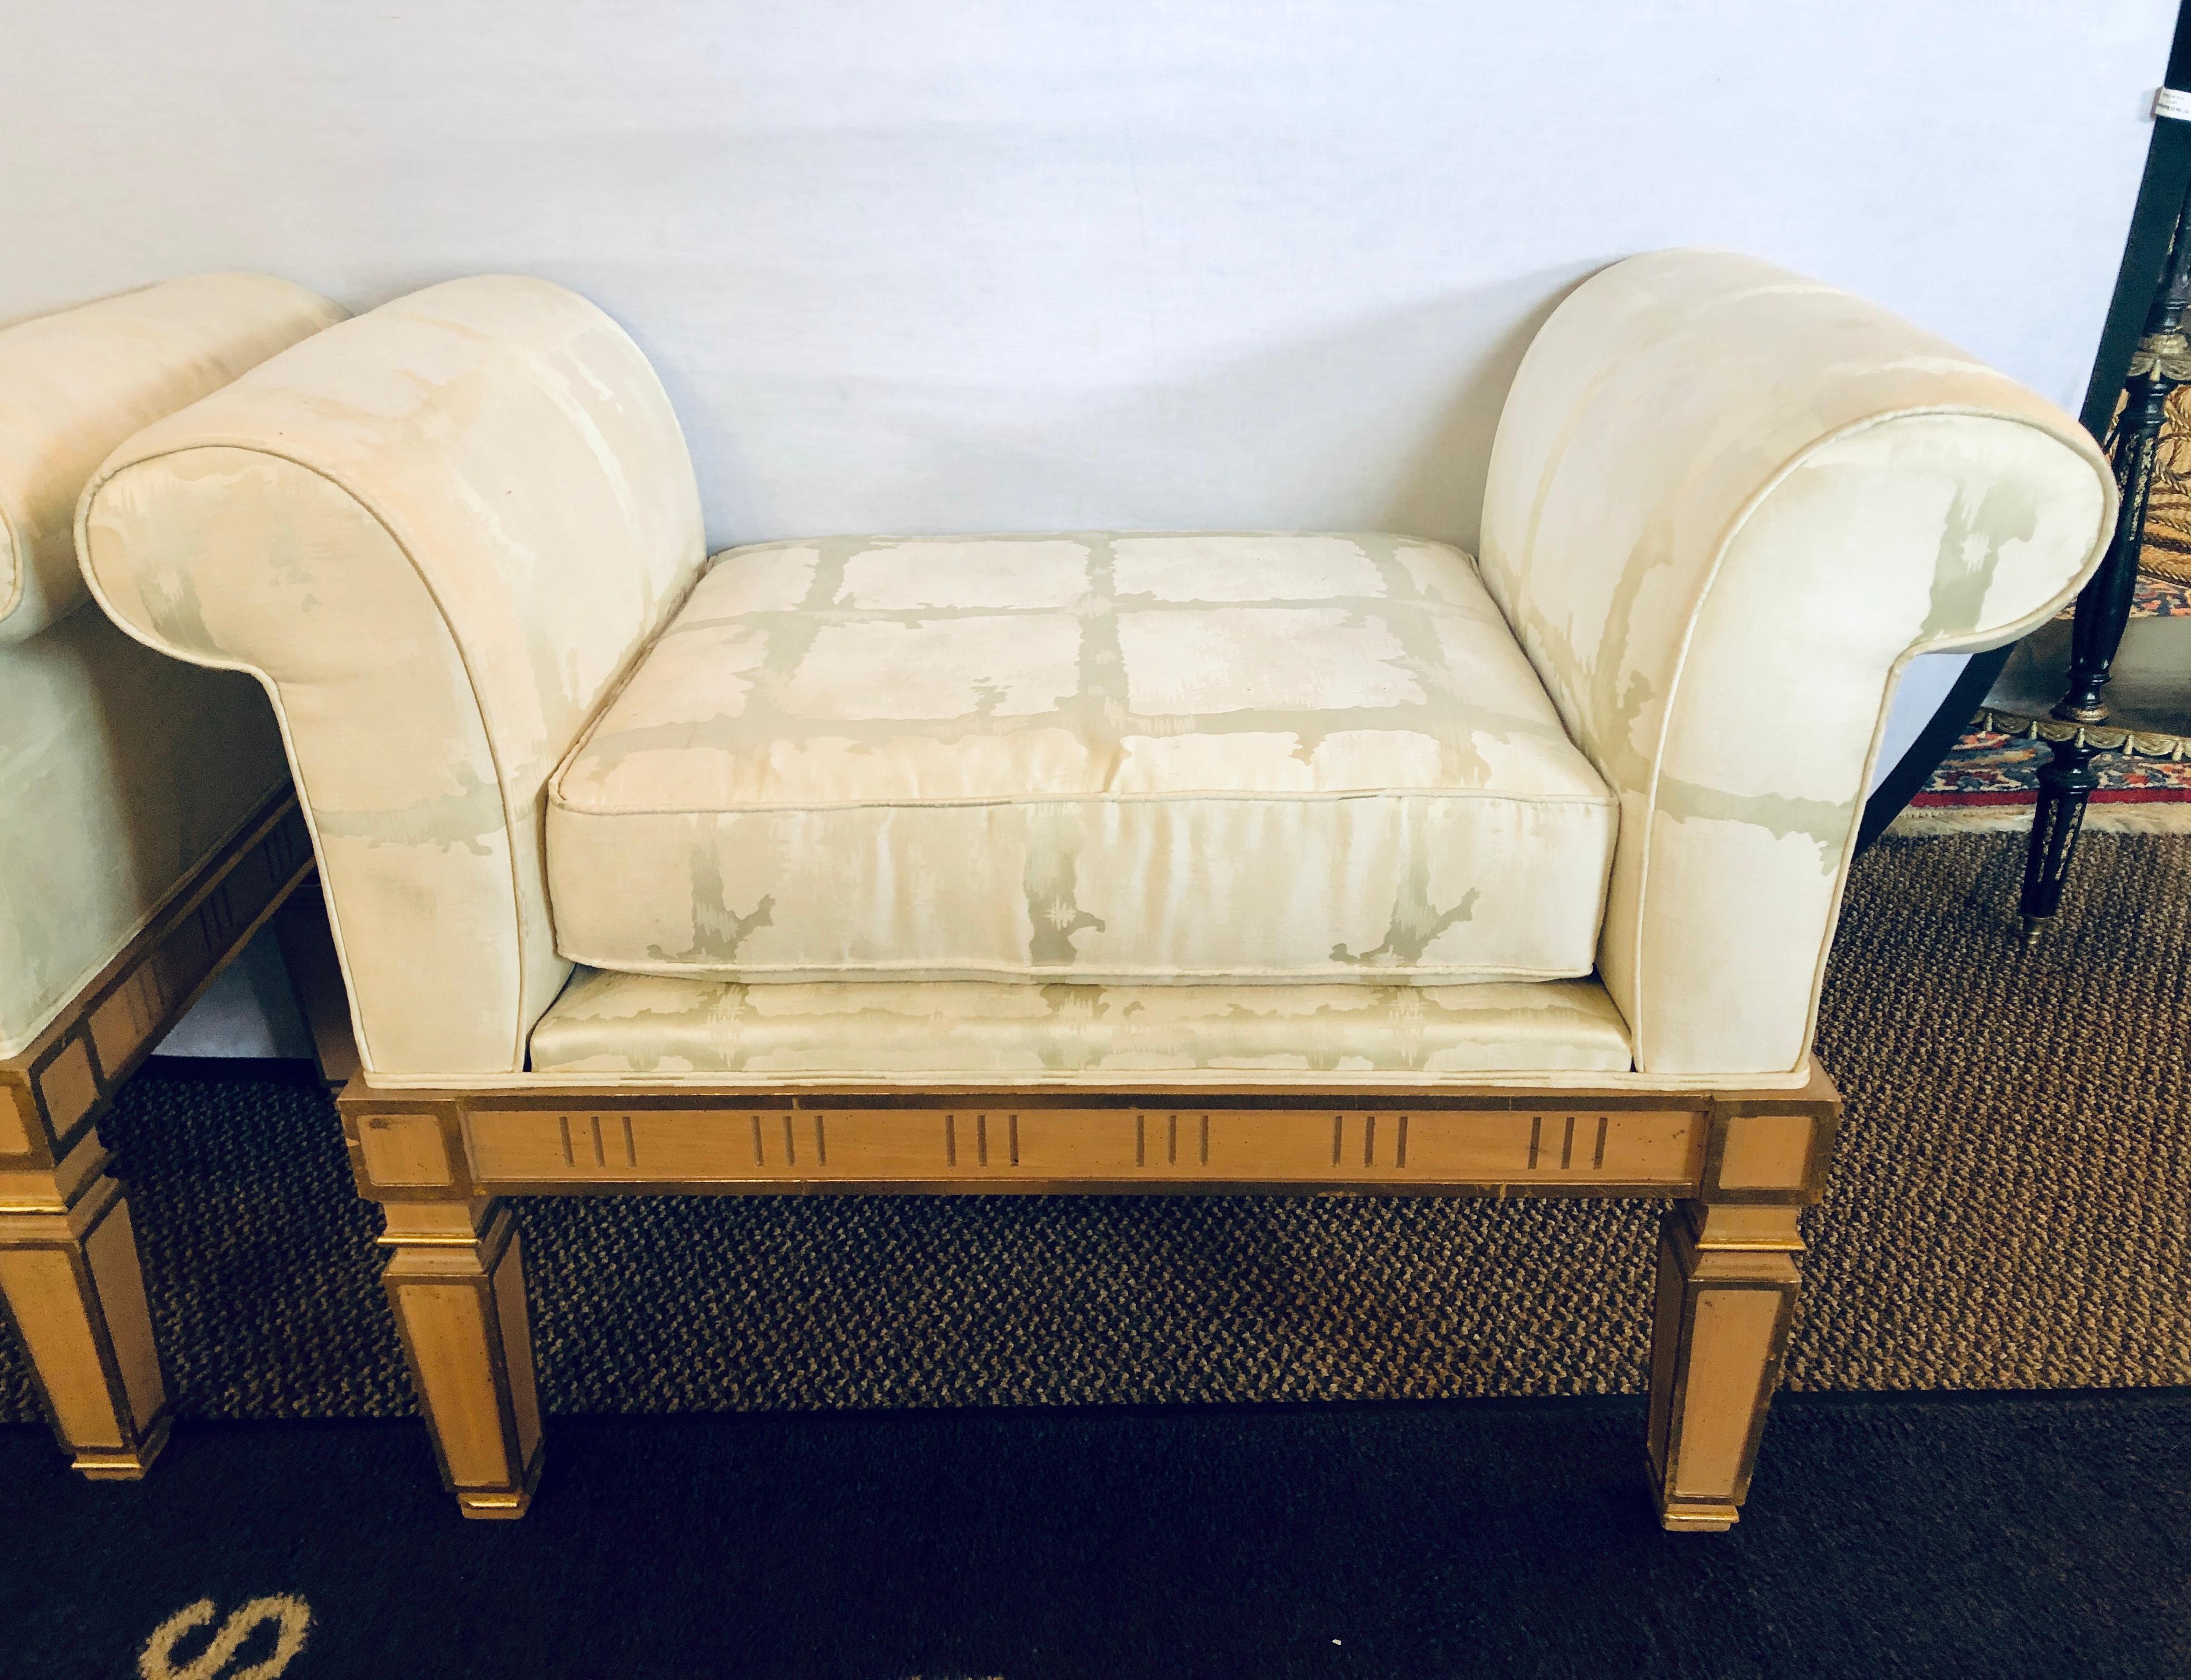 Pair of Italian neoclassical style window benches crème painted with gilt highlights.